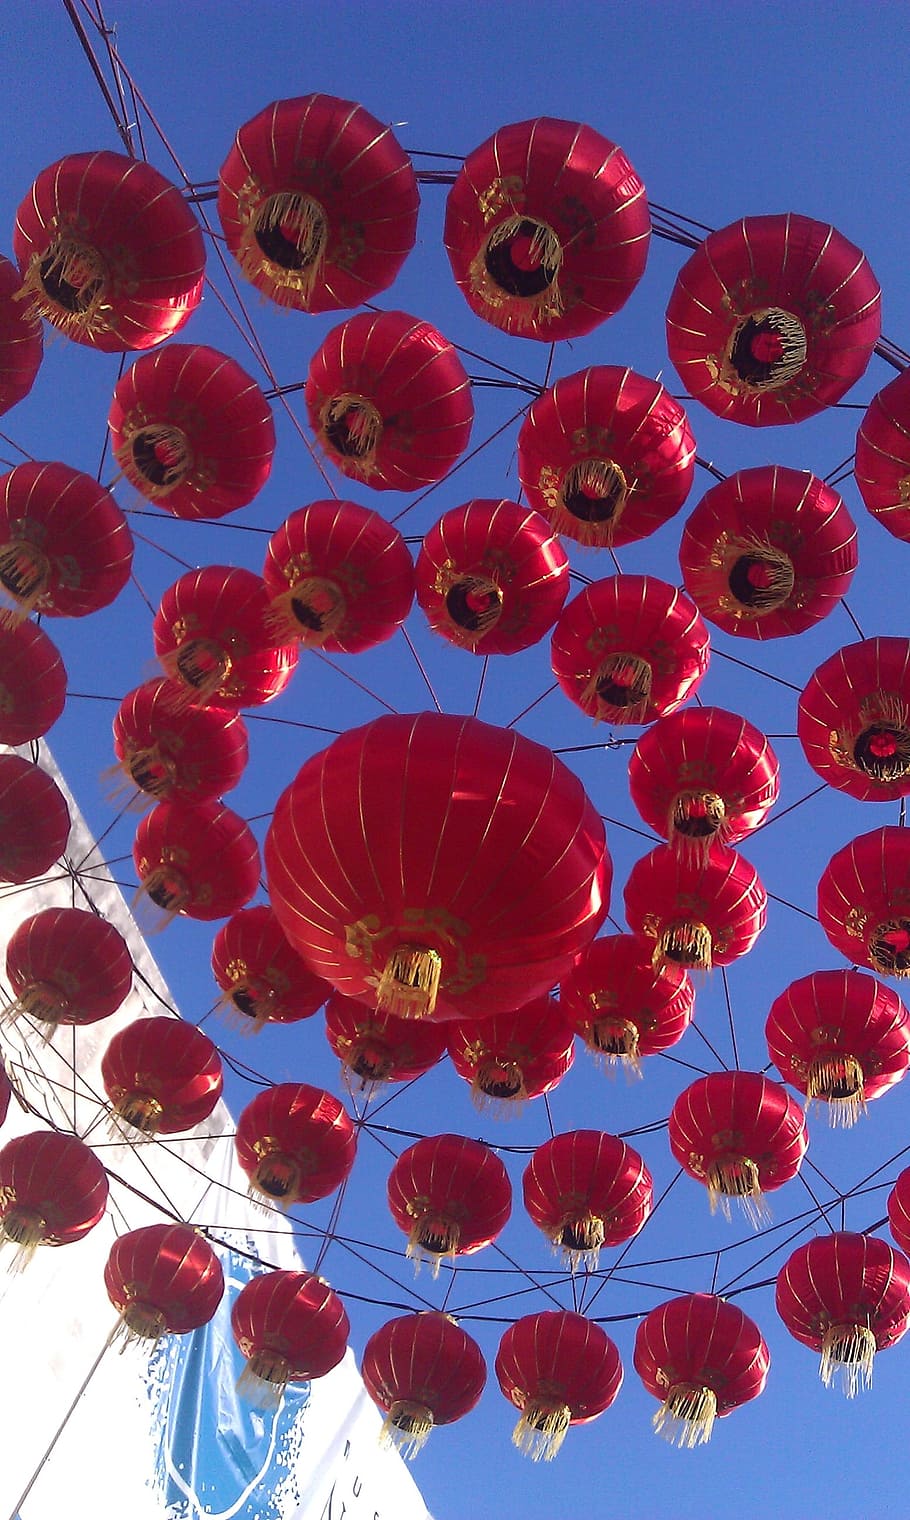 Paper, Chinese Lanterns, lanterns, display, concentric, overhead, culture, tradition, decoration, japanese lanterns